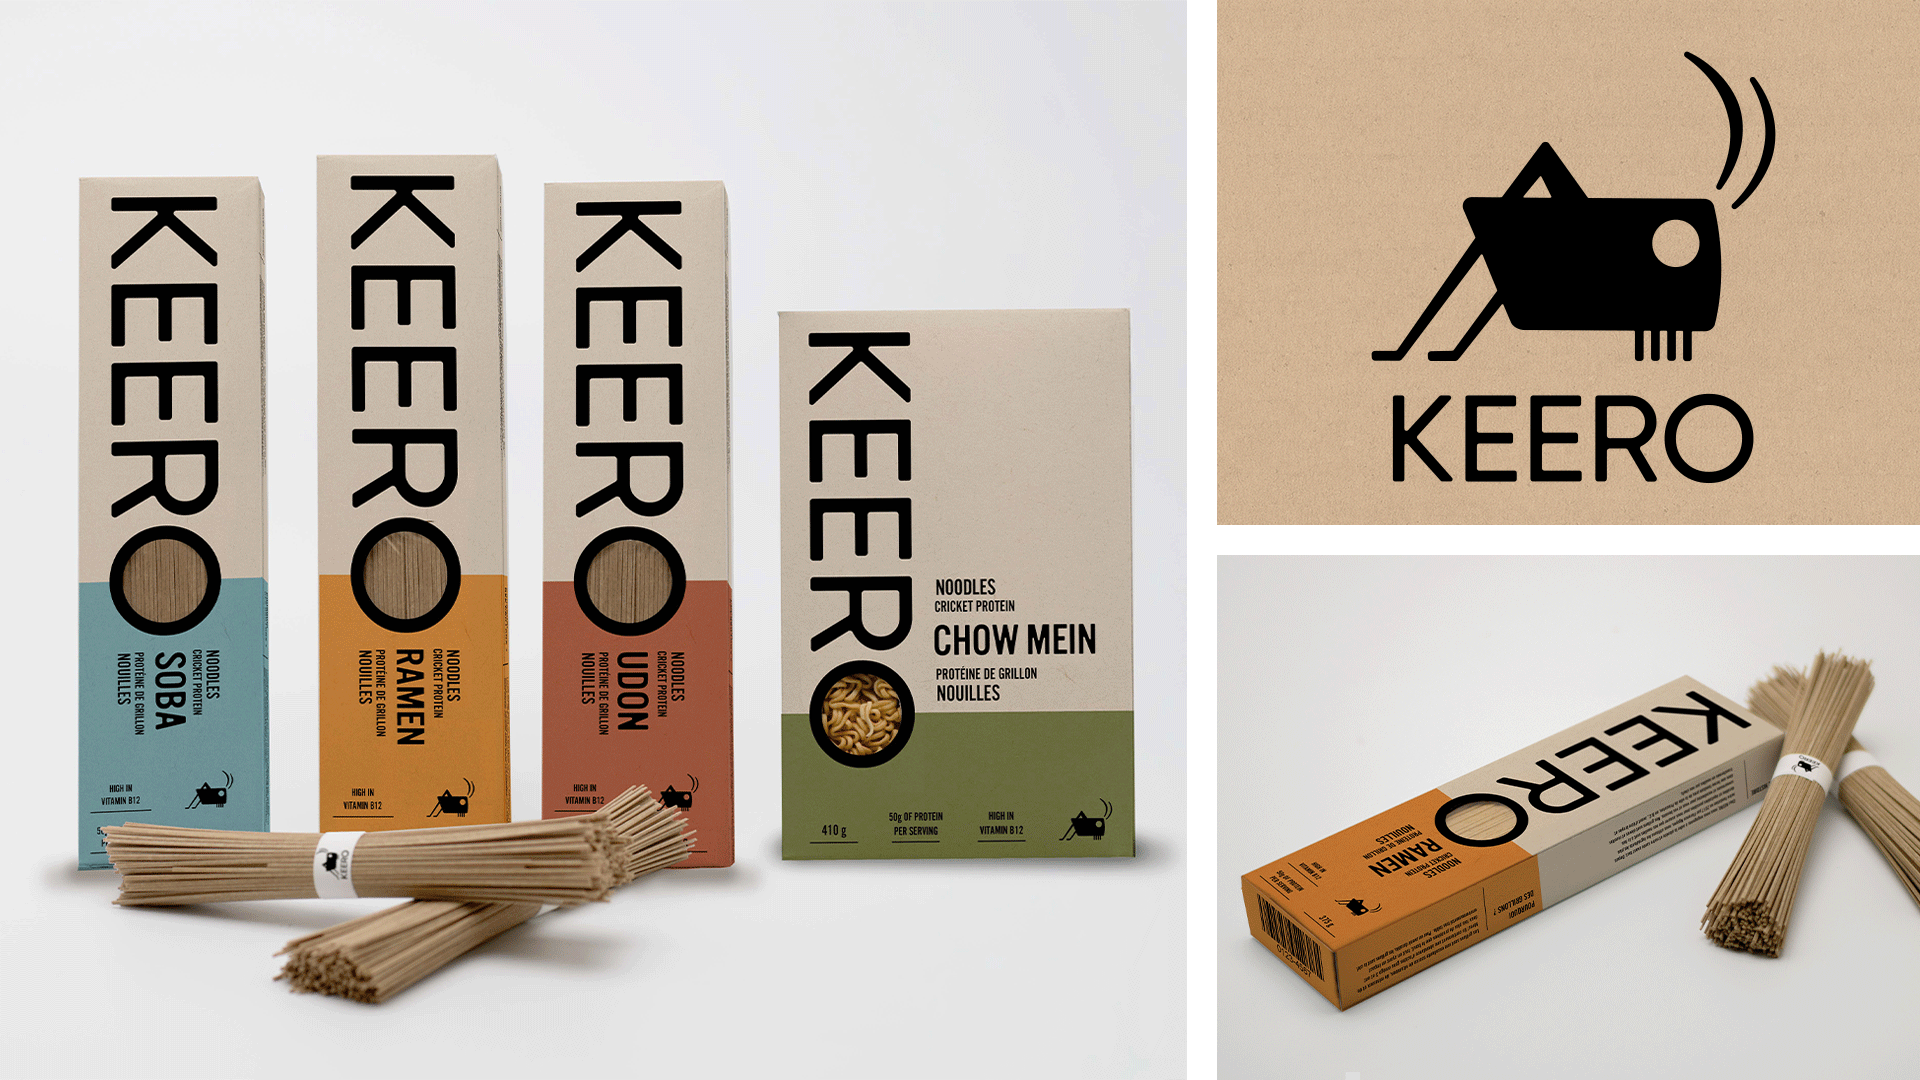 One photo of 4 noodle boxes, the KEERO logo, and a gif showcasing the front and back of the ramen box.